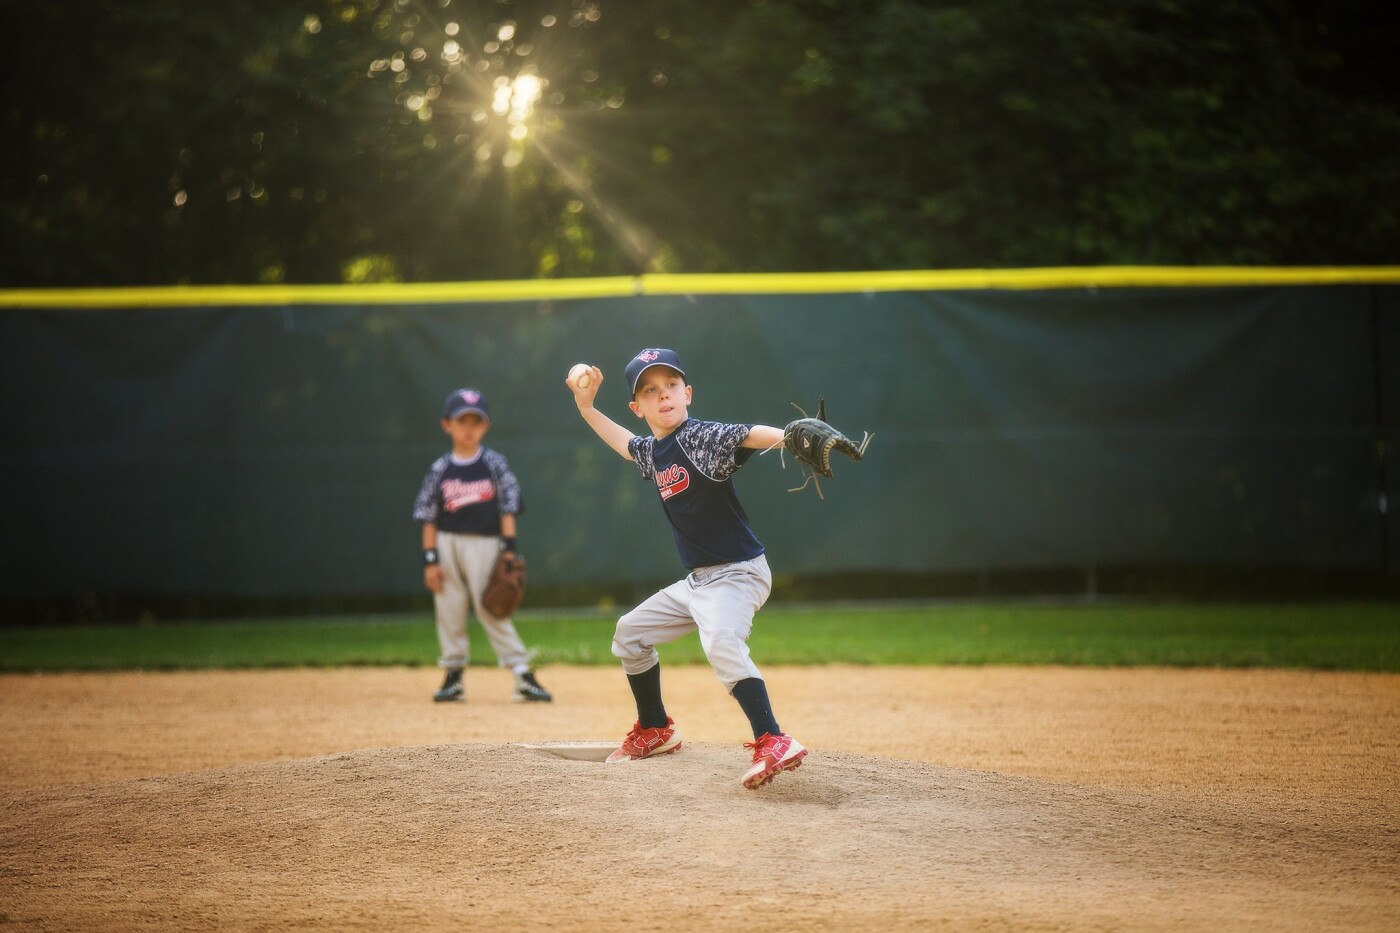 This is was my son's first year playing travel baseball and I loved every minute of watching him and his teammates play their hearts out.  This is a photo of one of his teammates warming up to pitch!